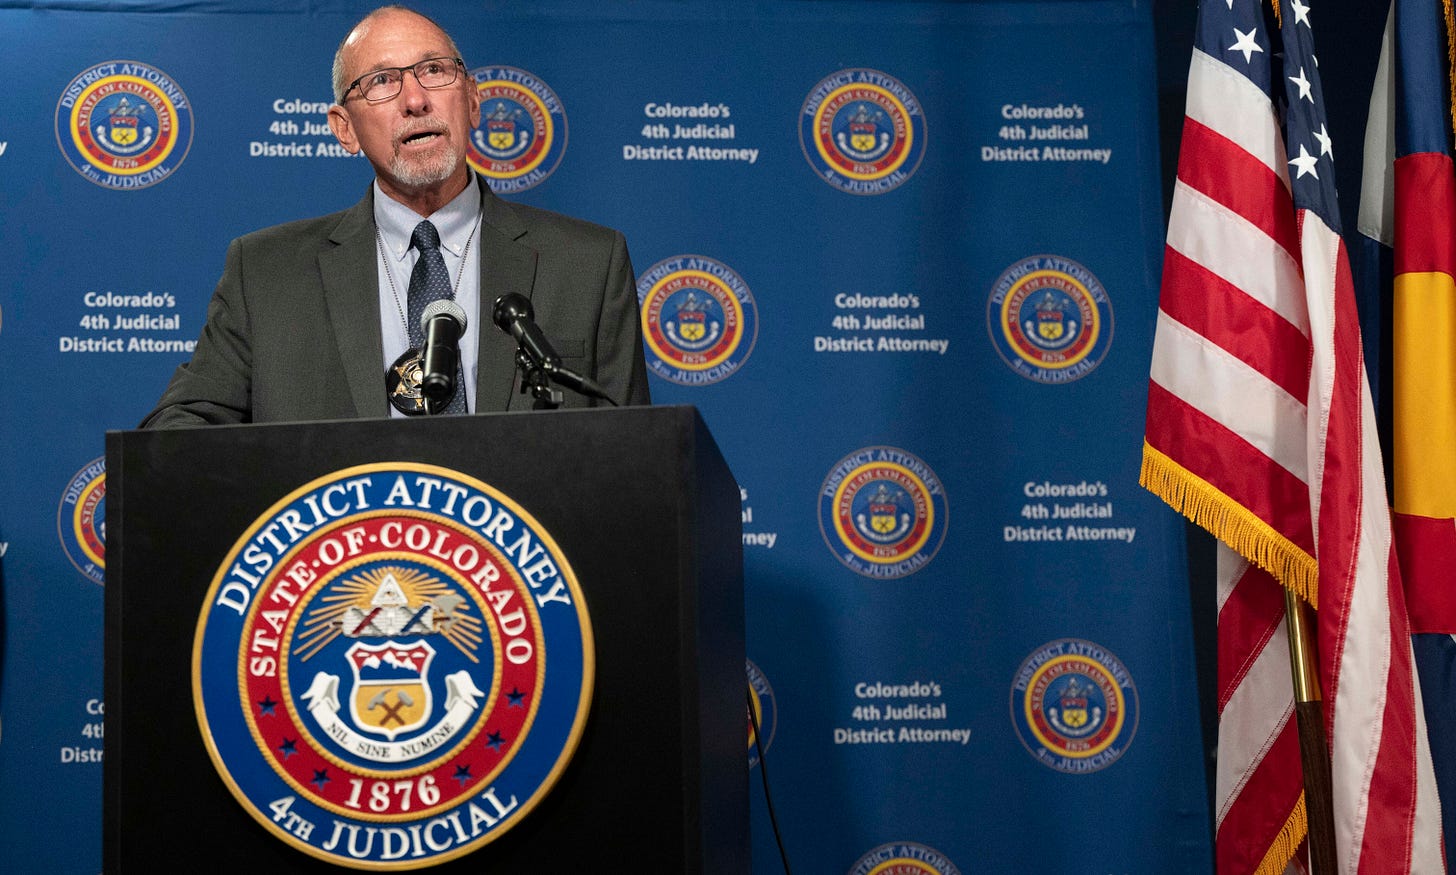 Fremont County Coroner Randy Keller speaks during a press conference at the 4th Judicial District Attorney's Office in Colorado Springs, Colo., Wednesday, Nov. 8, 2023.